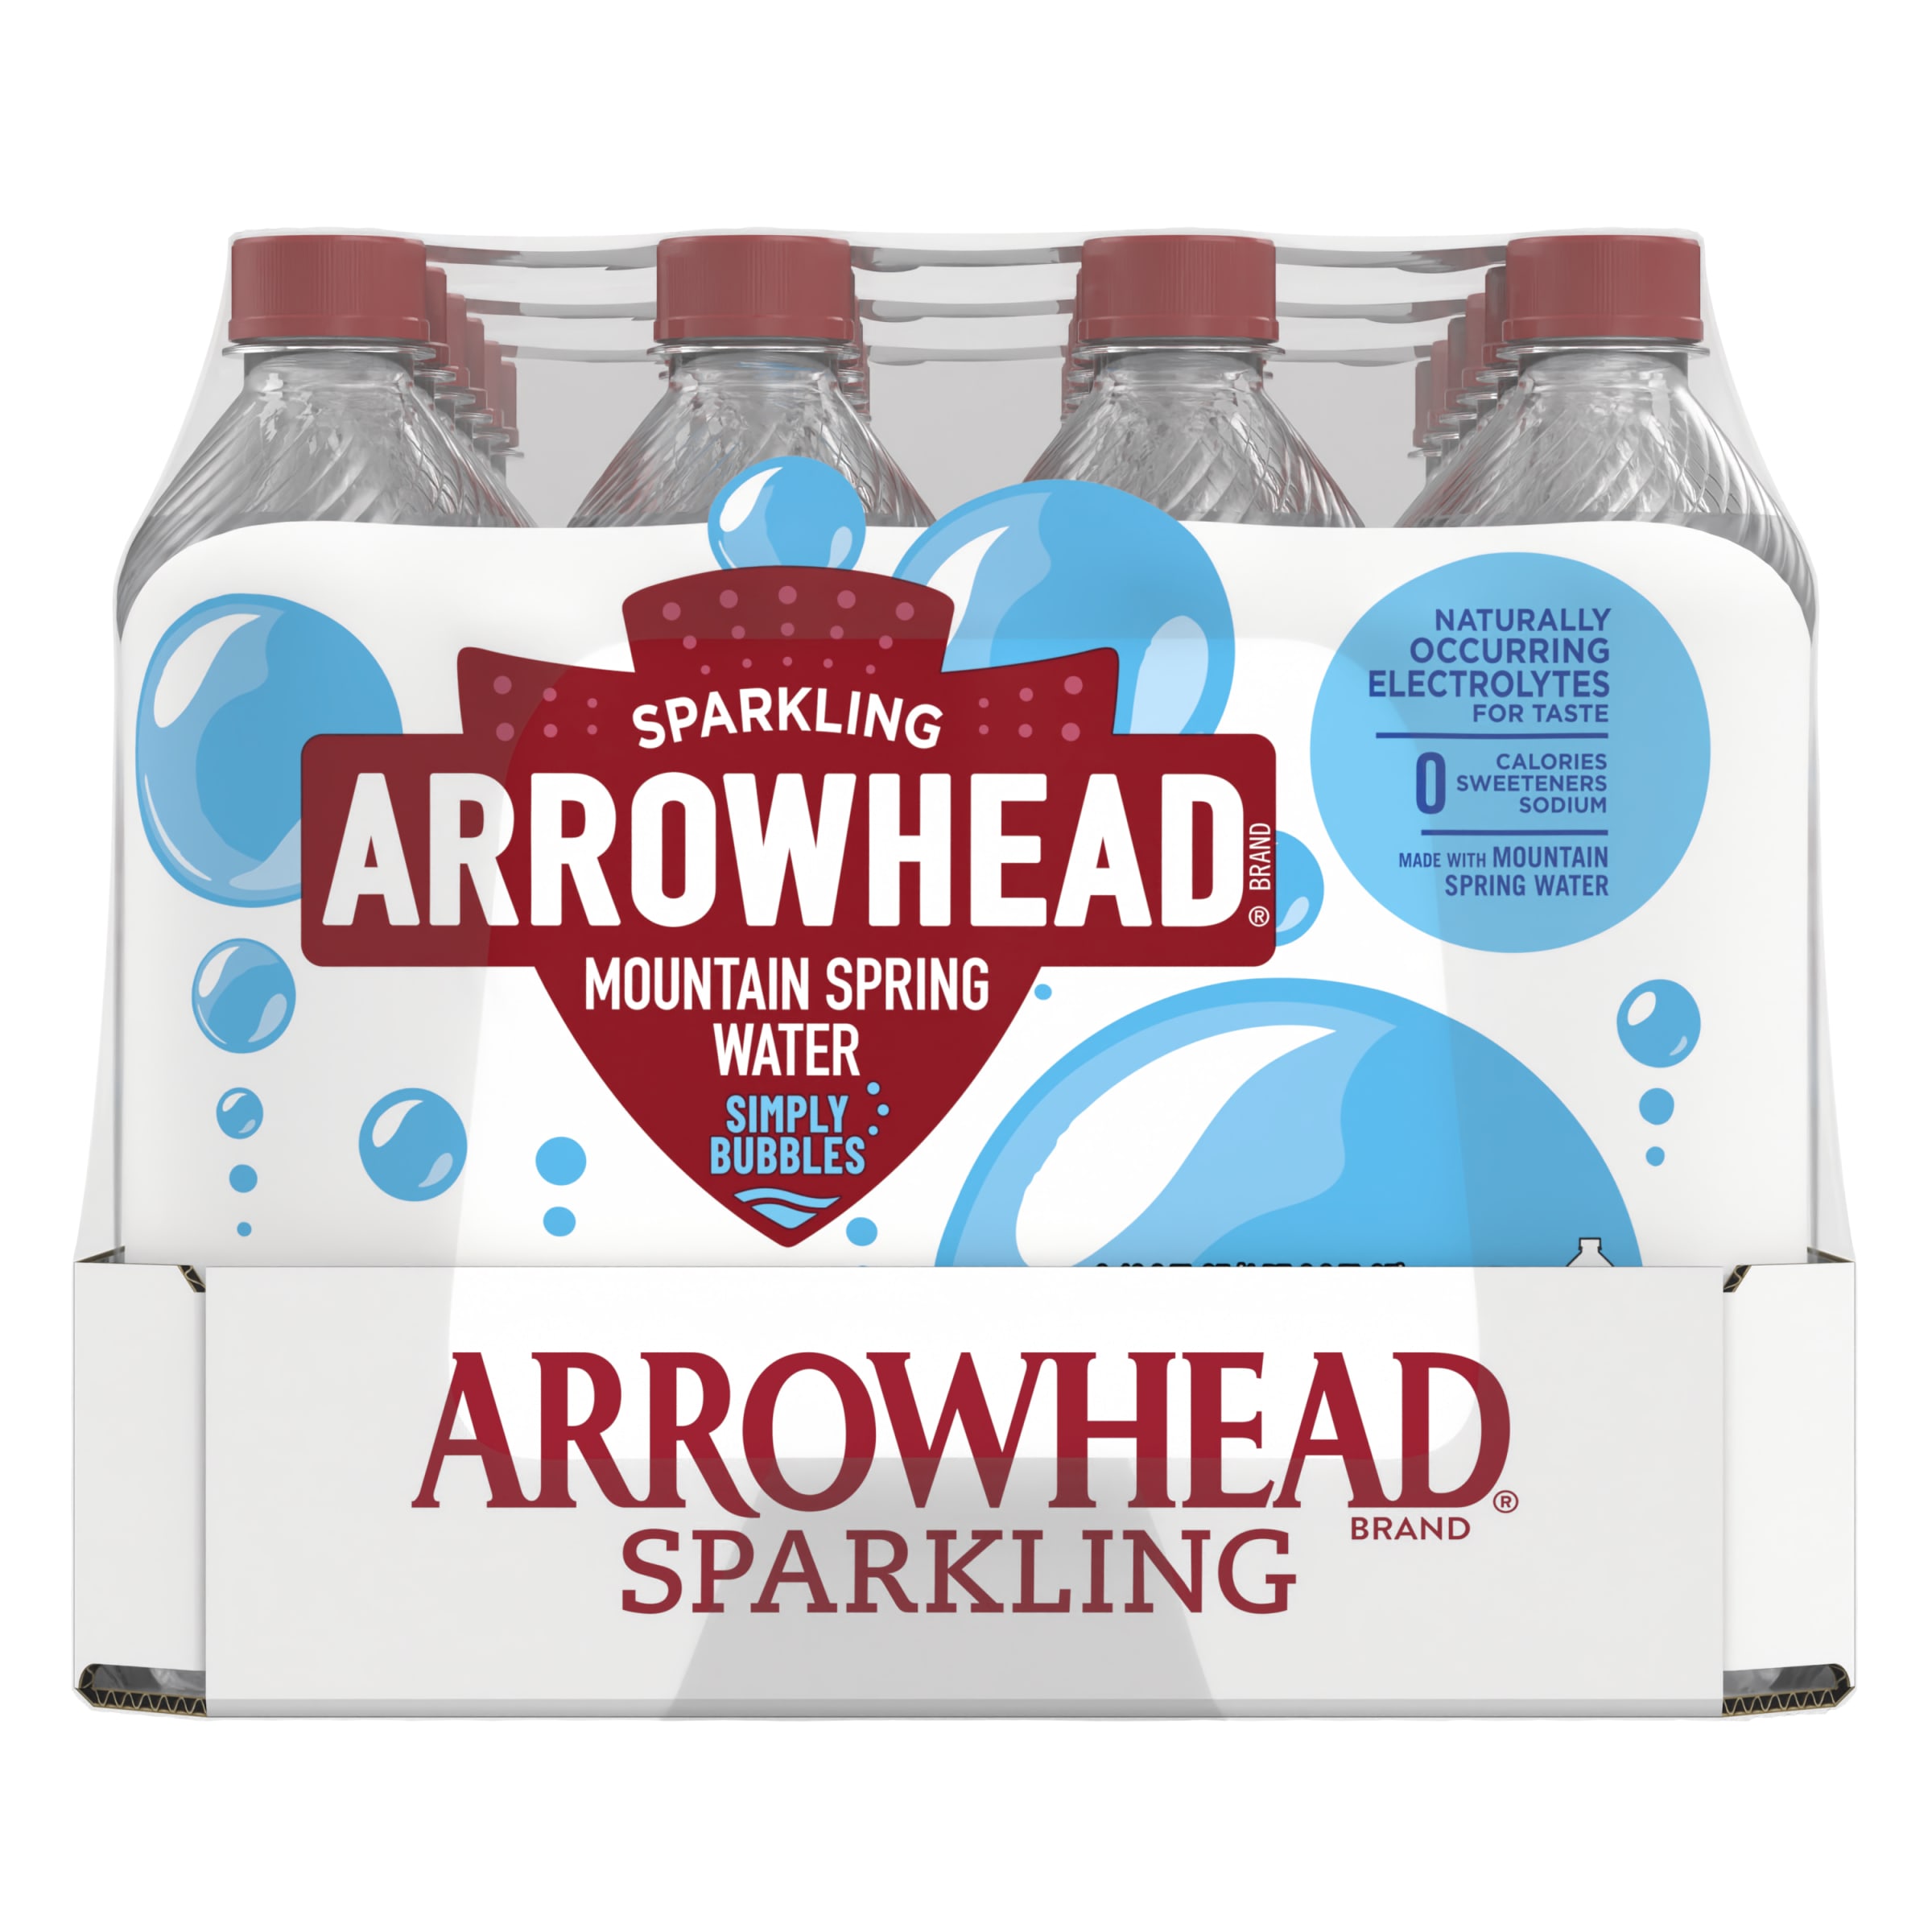 Arrowhead Sparkling Water, Simply Bubbles, 16.9 oz. Bottles (24 Count) - image 3 of 6